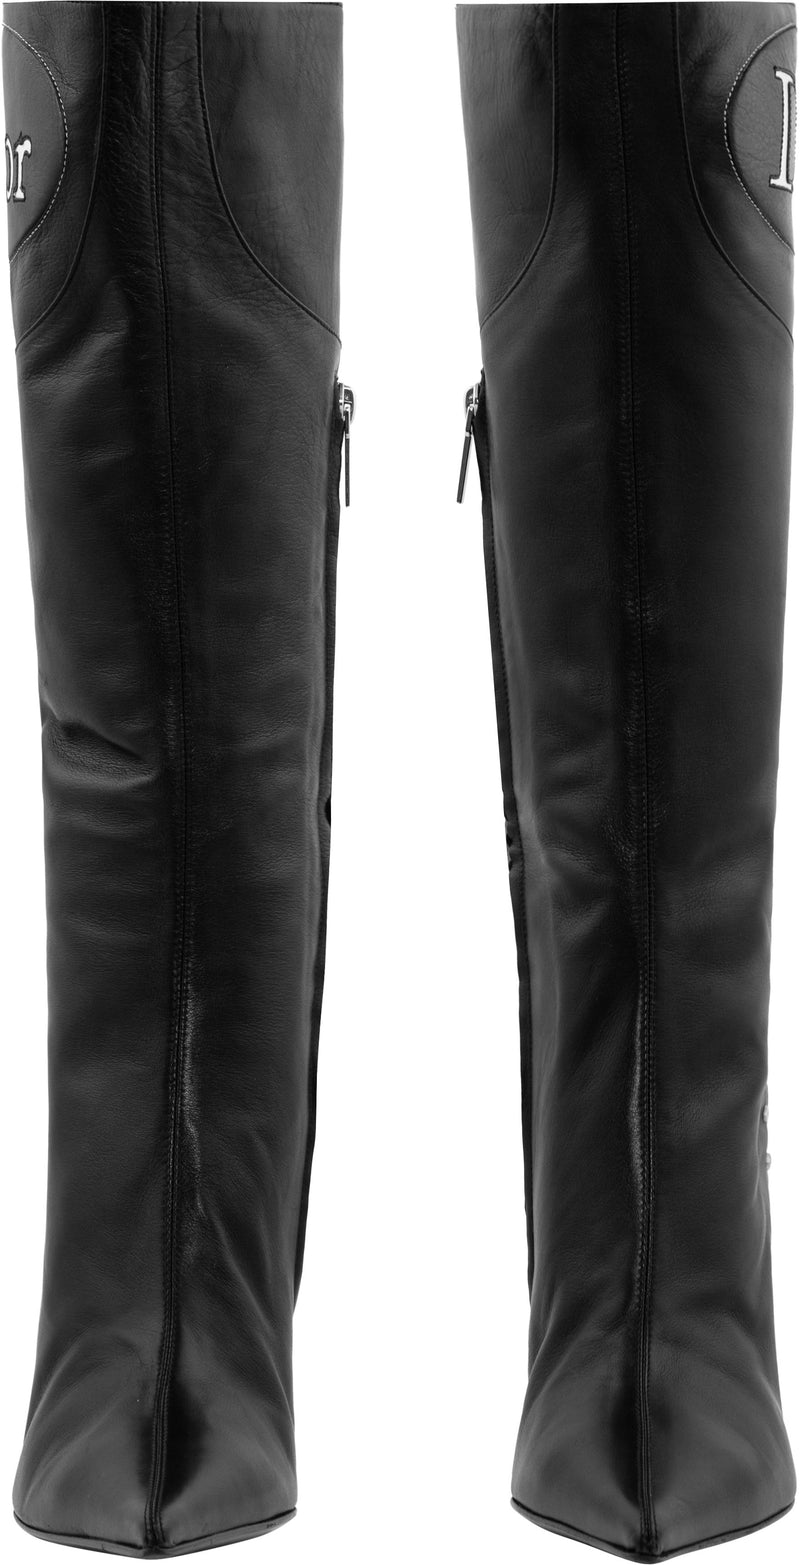 Christian Dior Moto Logo Leather Knee Boots